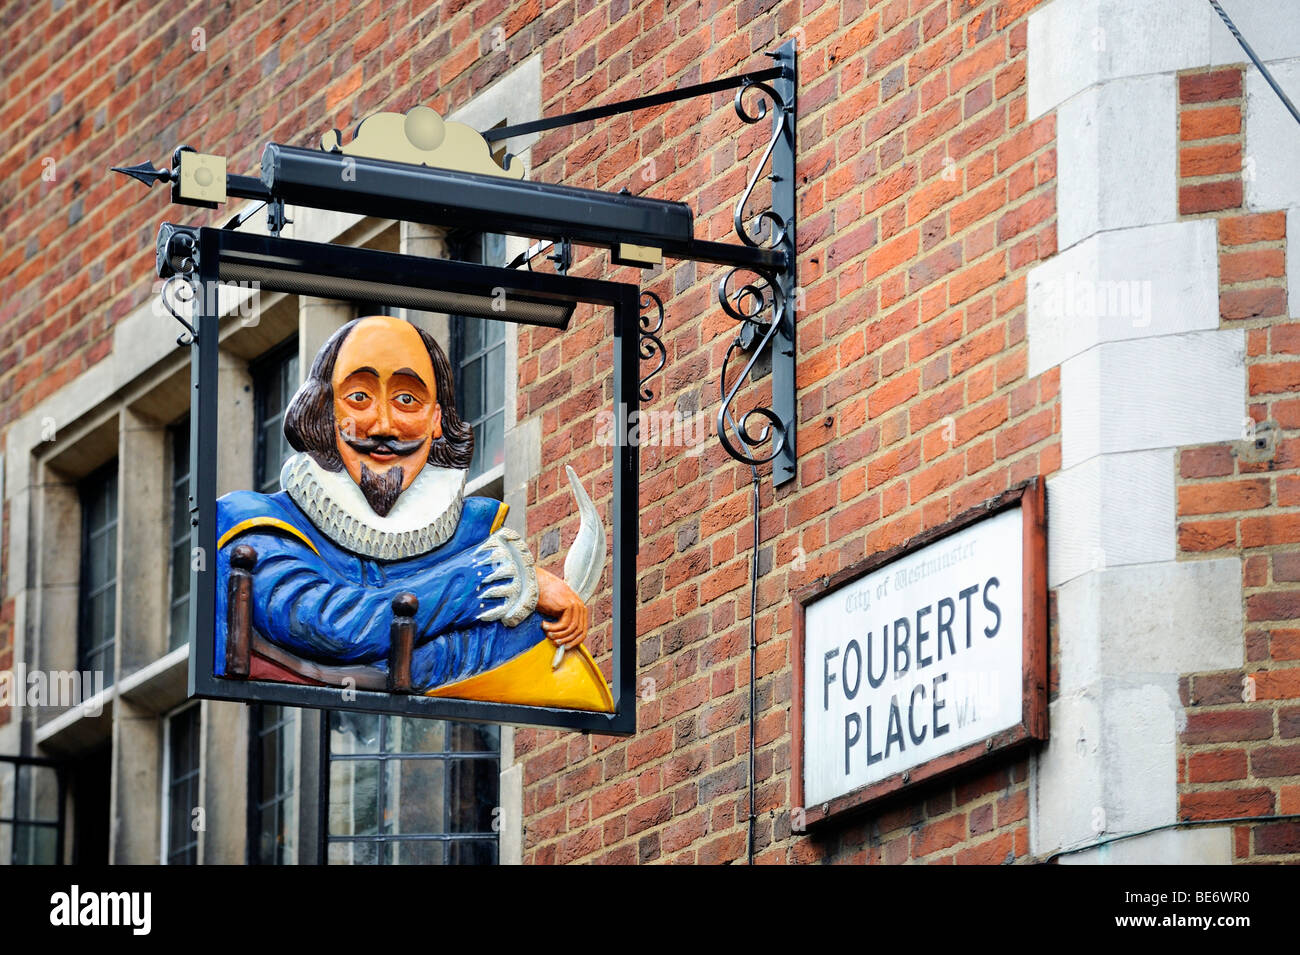 Pub sign with William Shakespeare's portrait on Foubert Place in the Soho district, London, England, United Kingdom, Europe Stock Photo